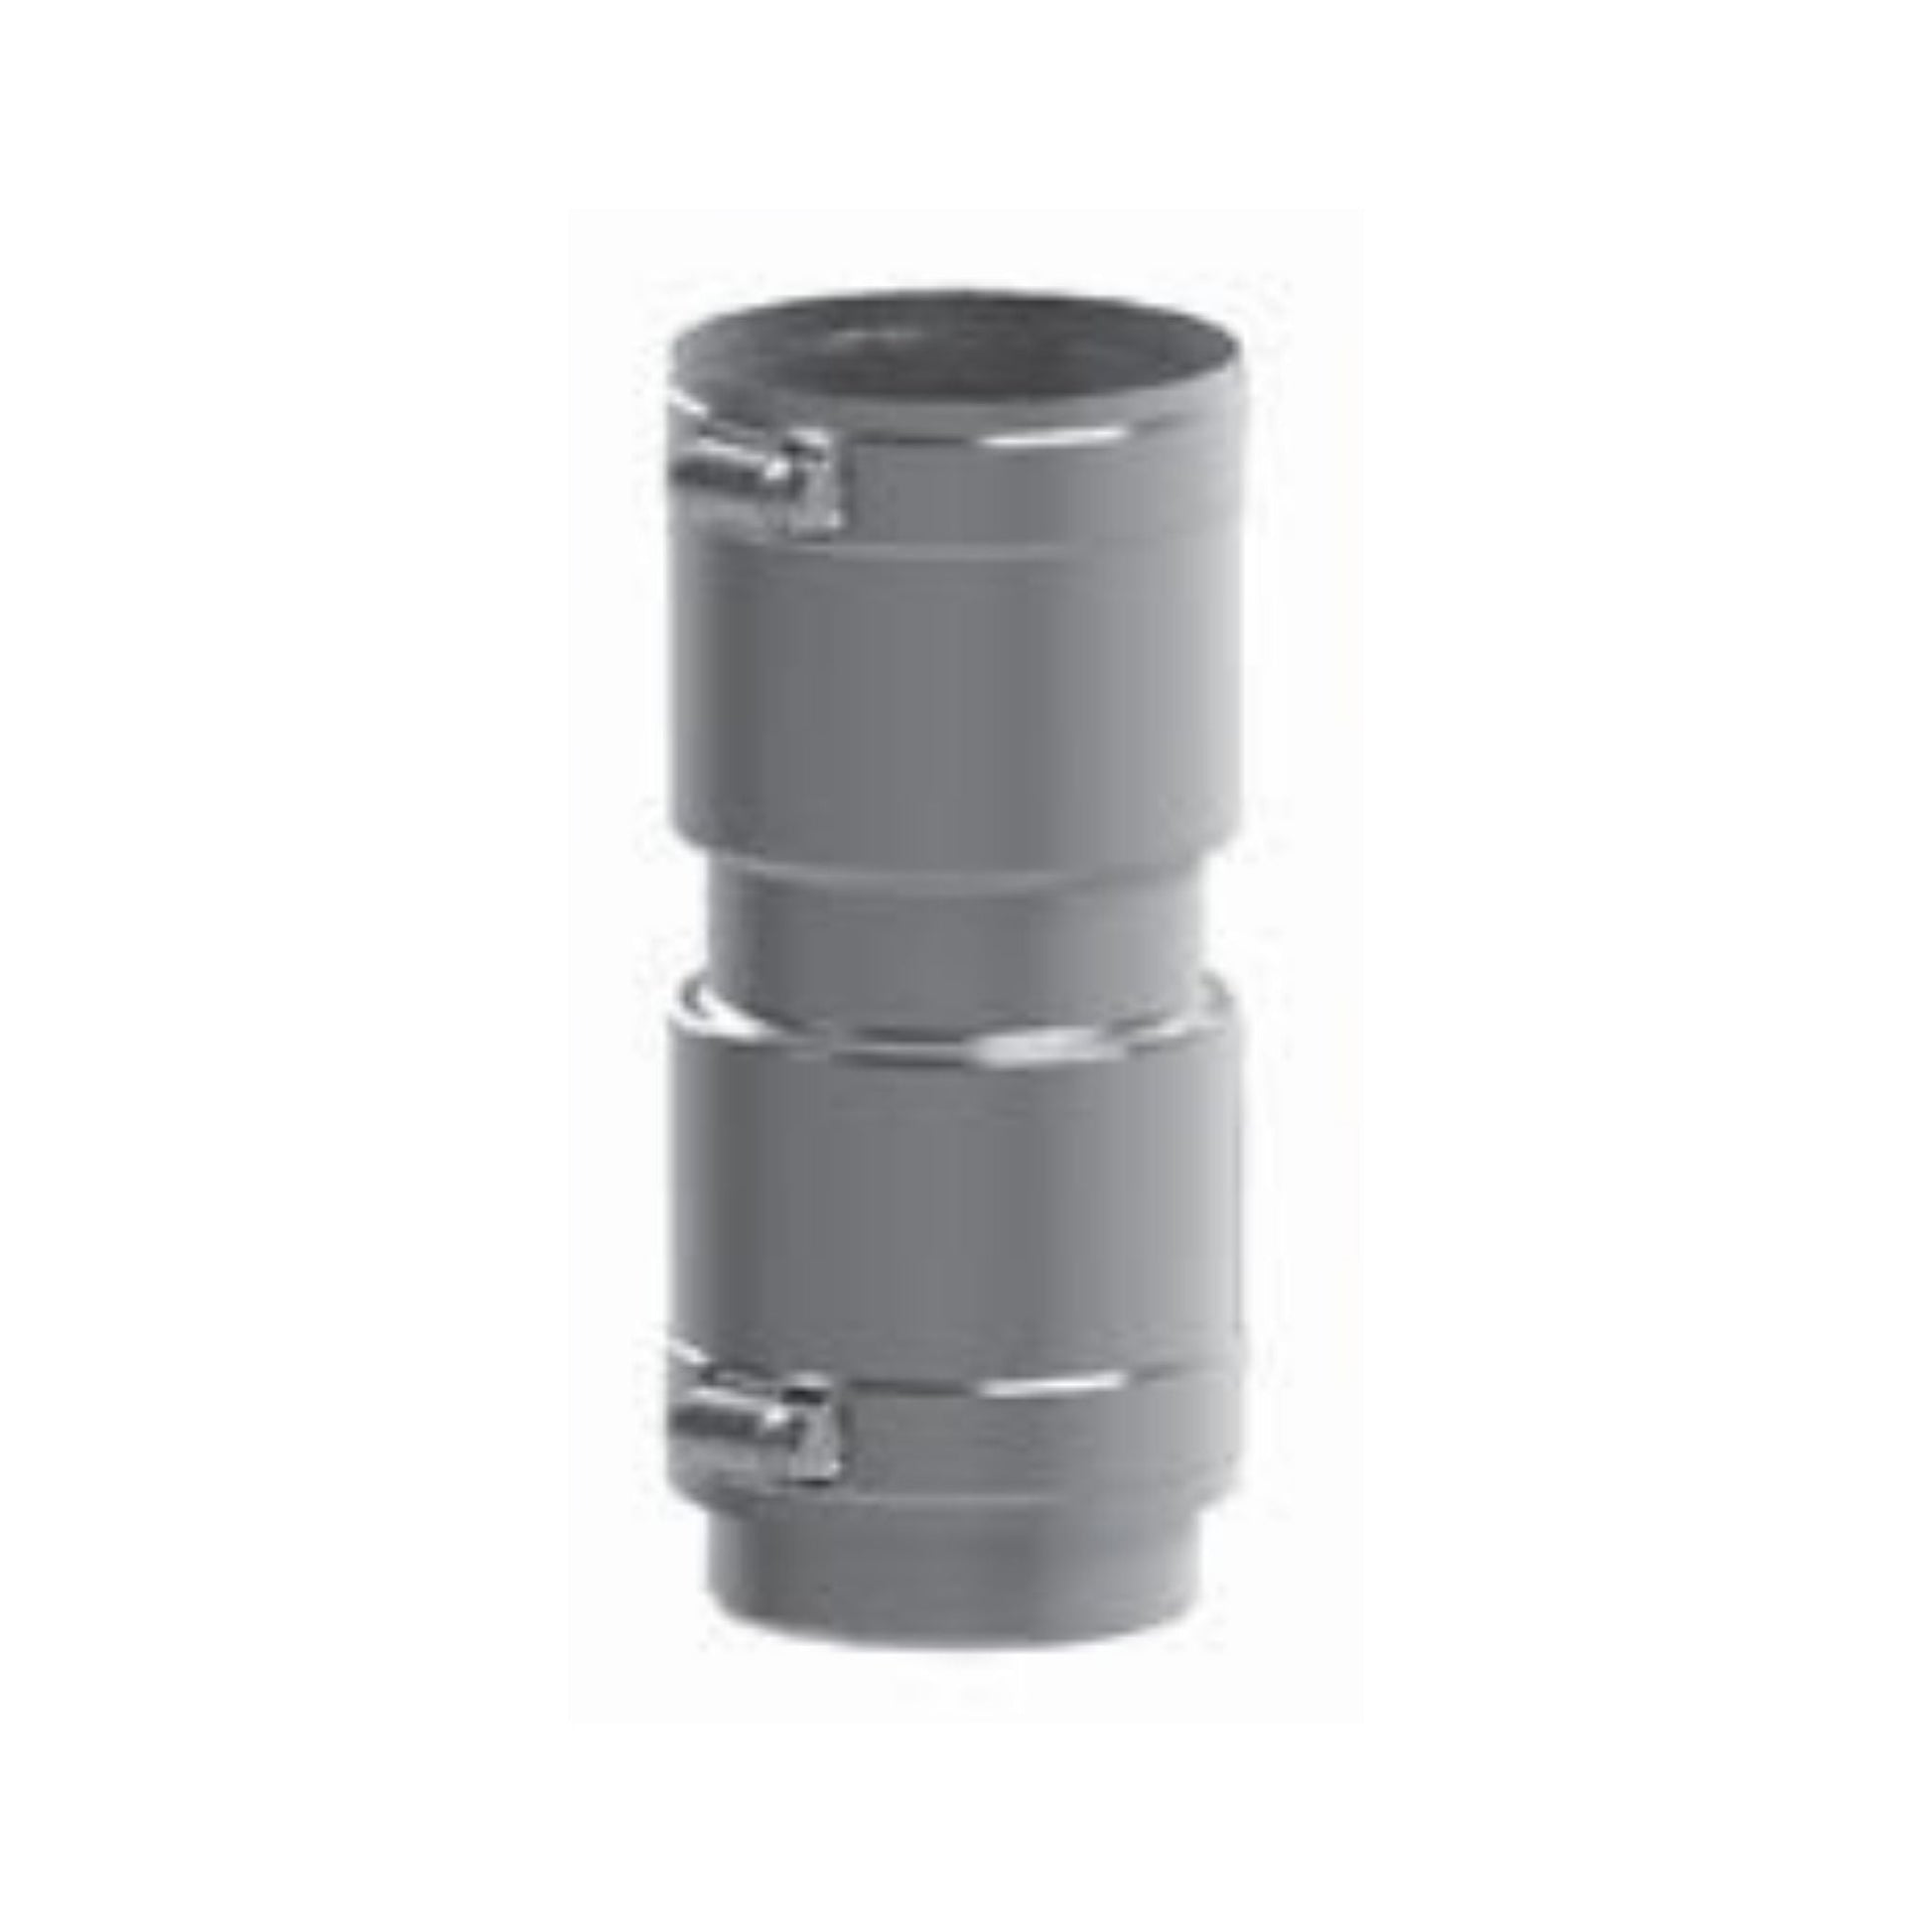 DuraVent FasNSeal Flex 6" Stainless Steel Coupler